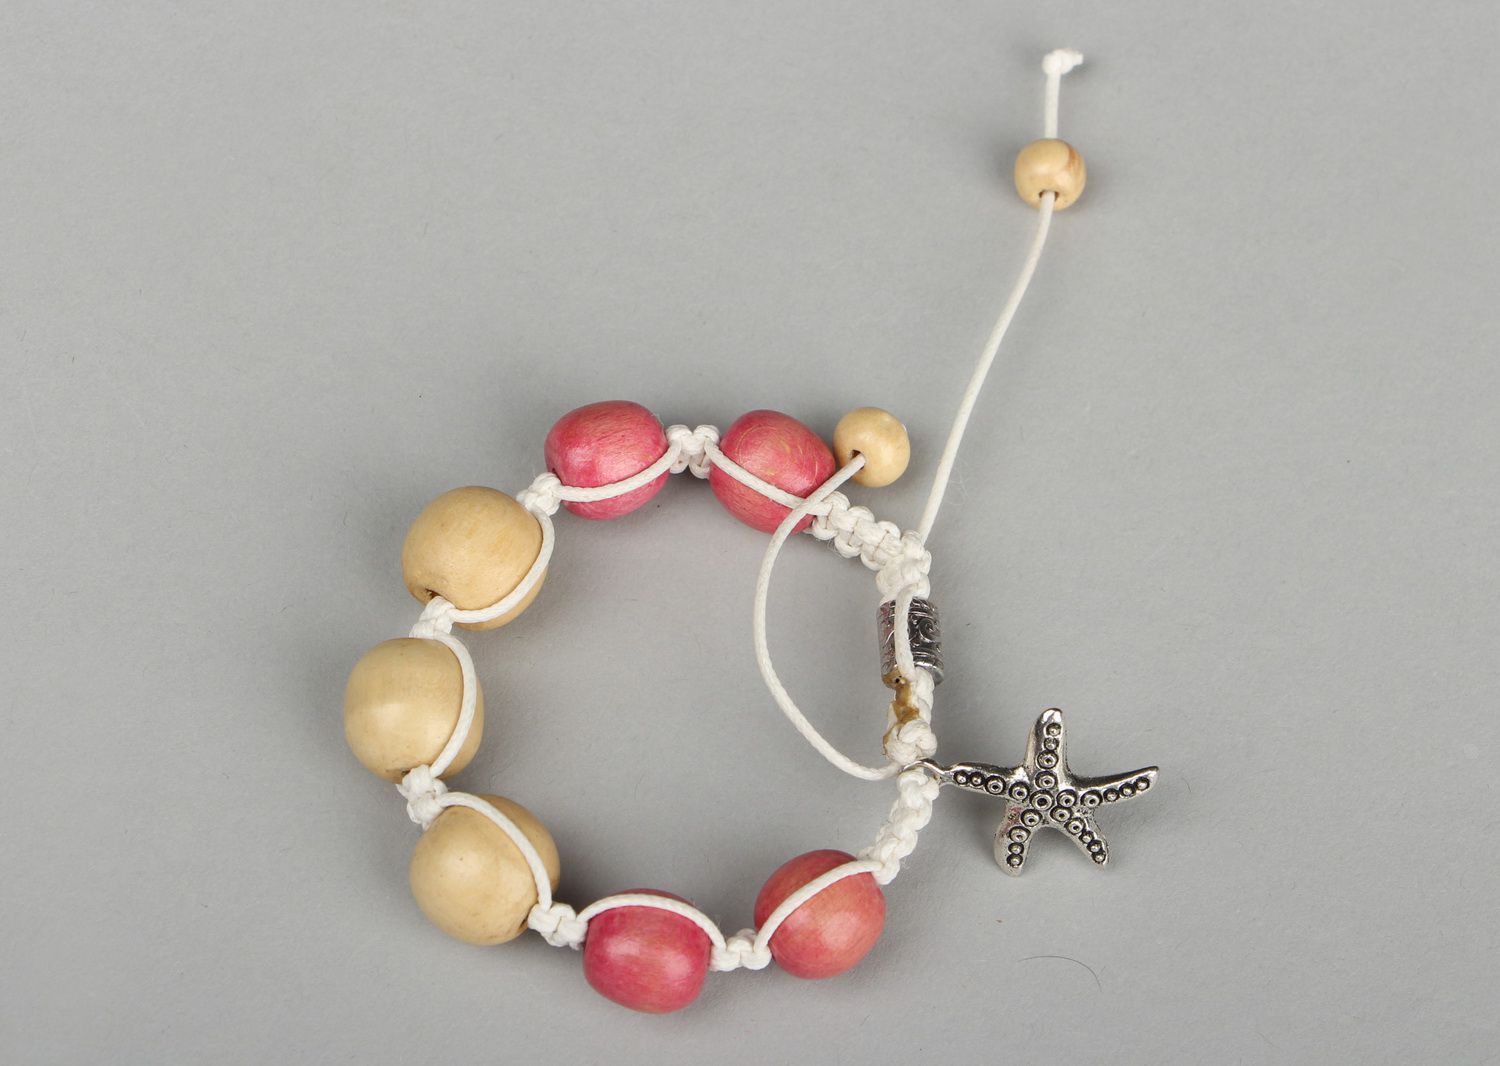 Bracelet made of wooden beads photo 3